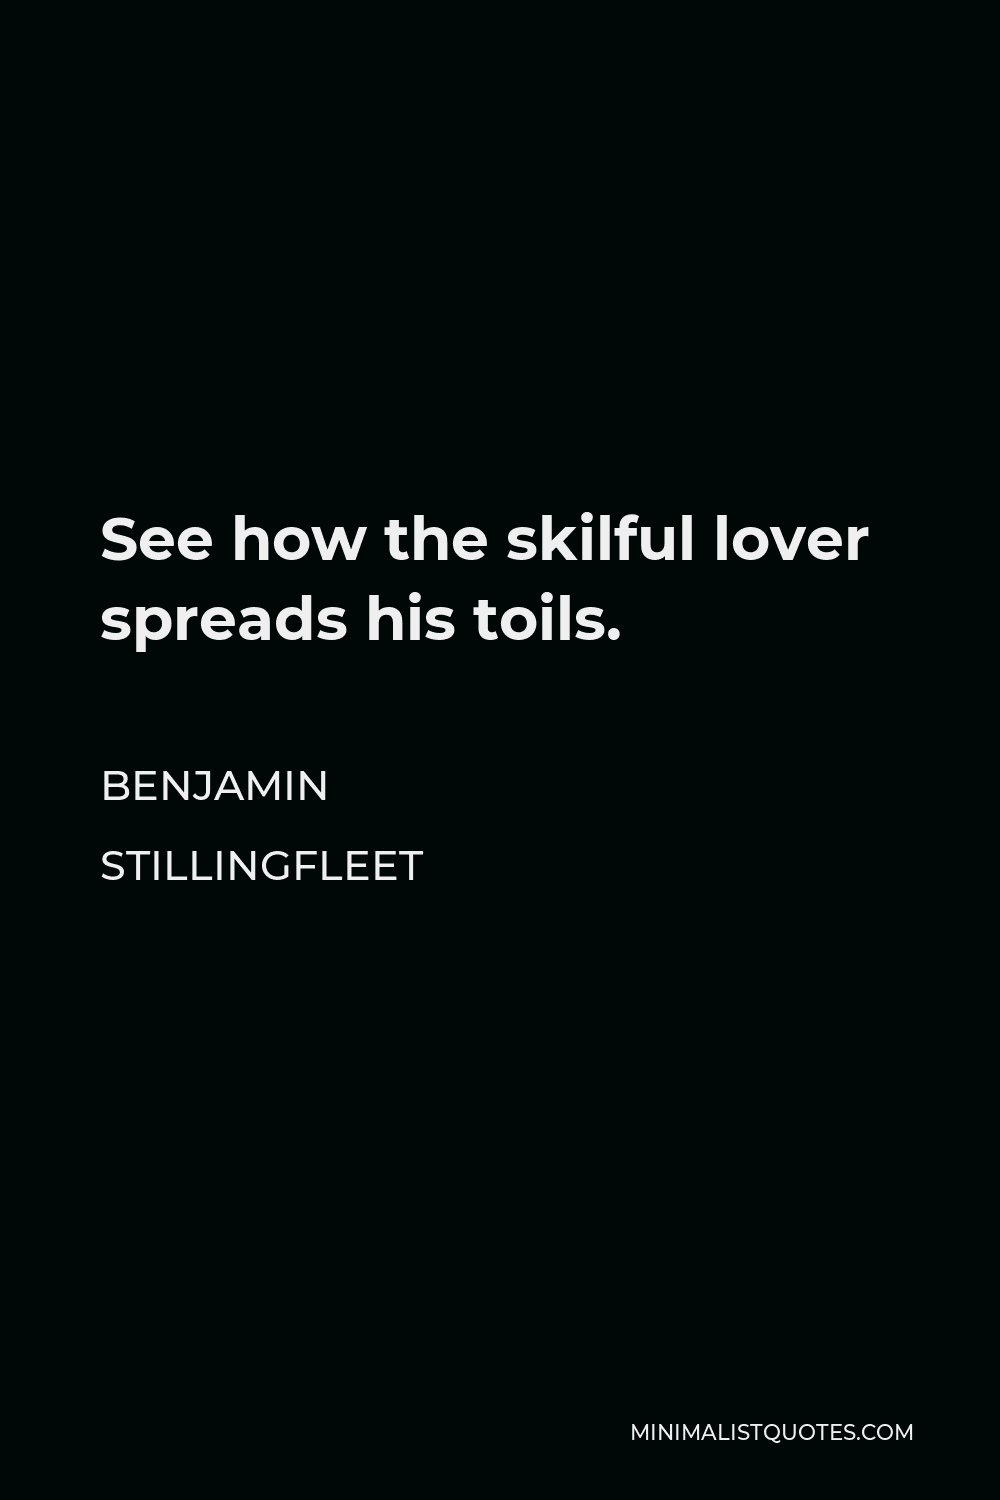 Benjamin Stillingfleet Quote - See how the skilful lover spreads his toils.